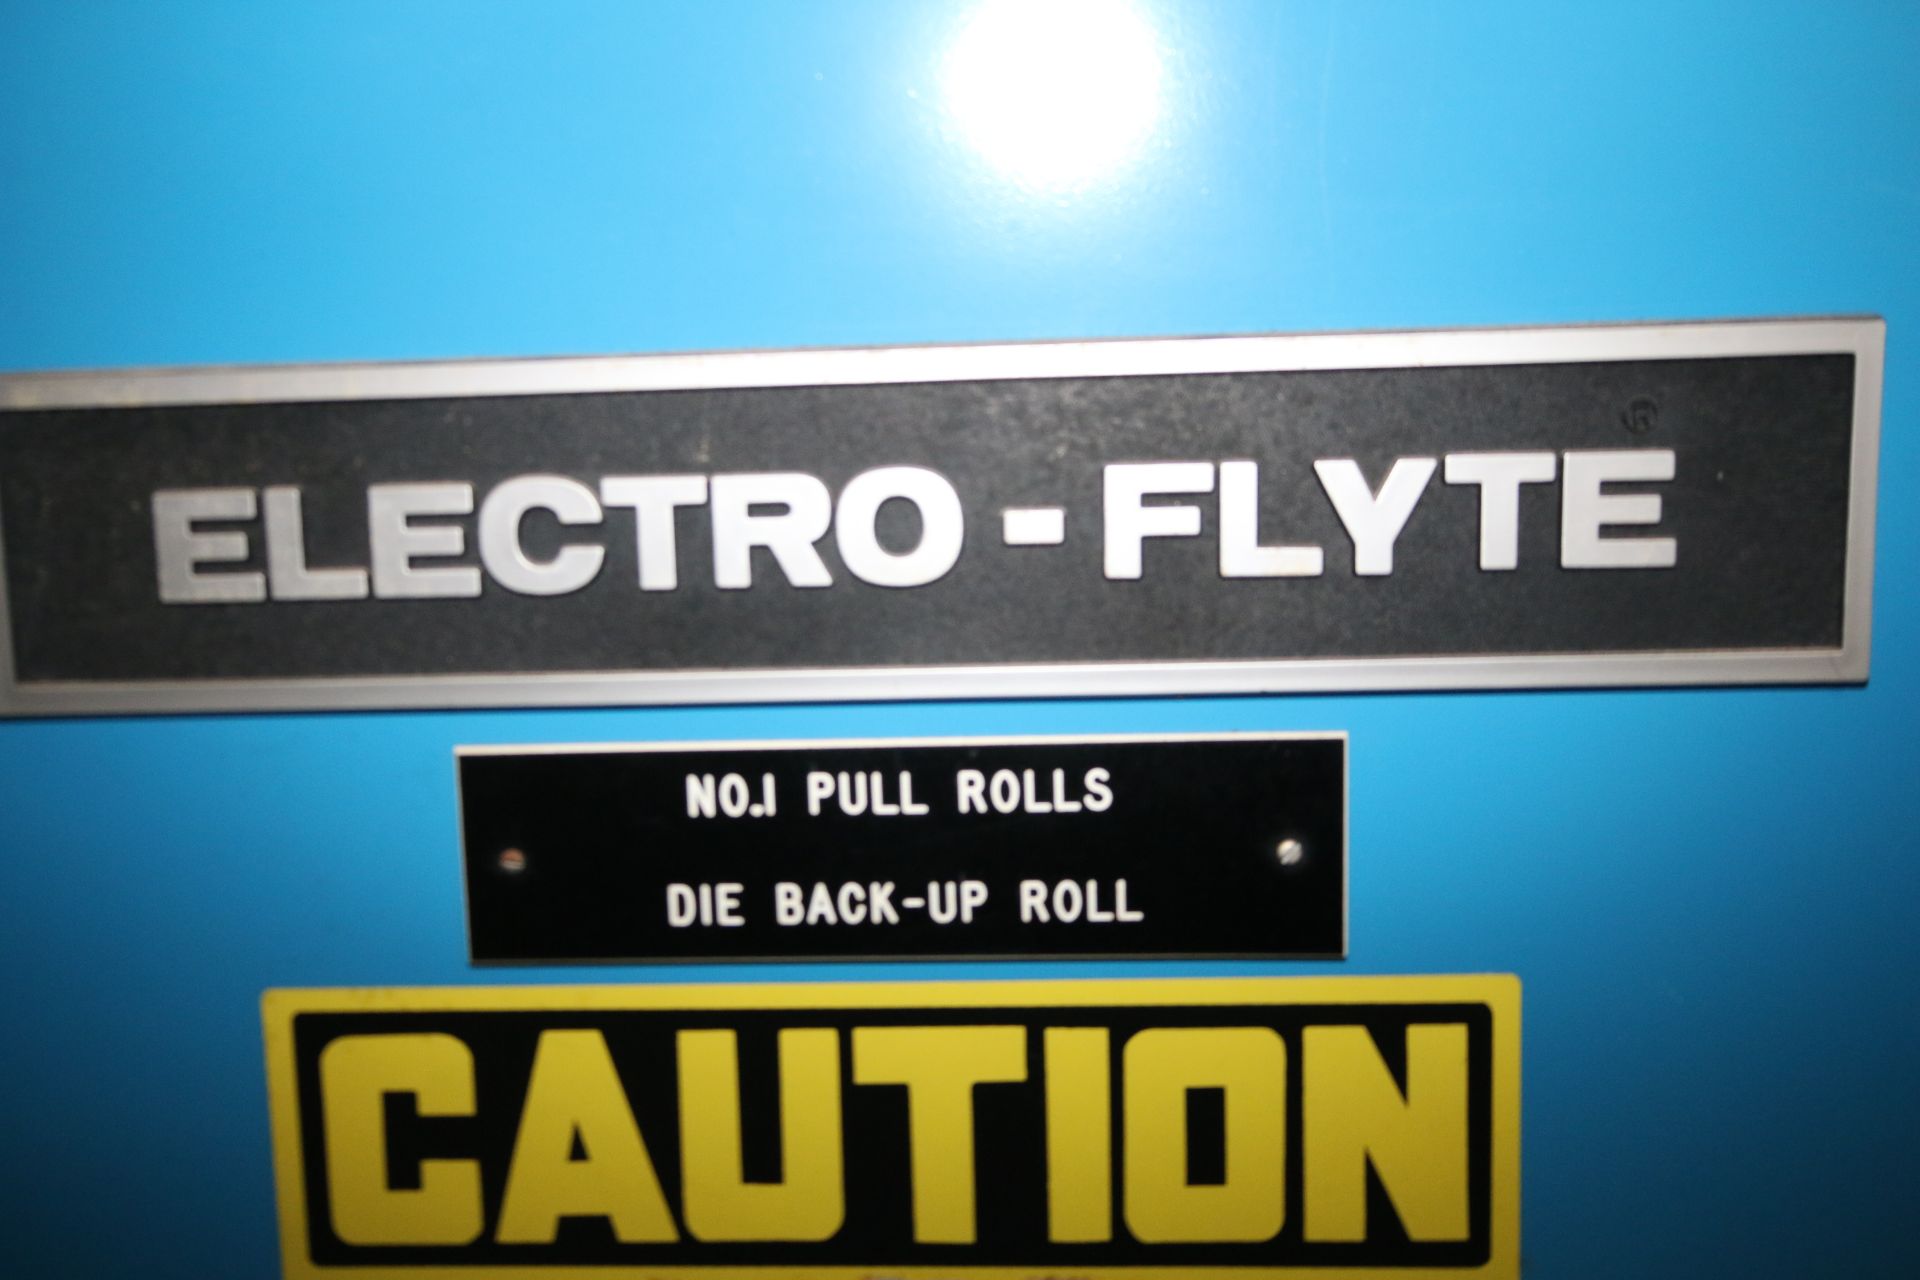 Coater Area #1 Electro-Flyte Single Door Control Panel for #1 Pull Rolls and Die Back-Up Roll - Image 2 of 5